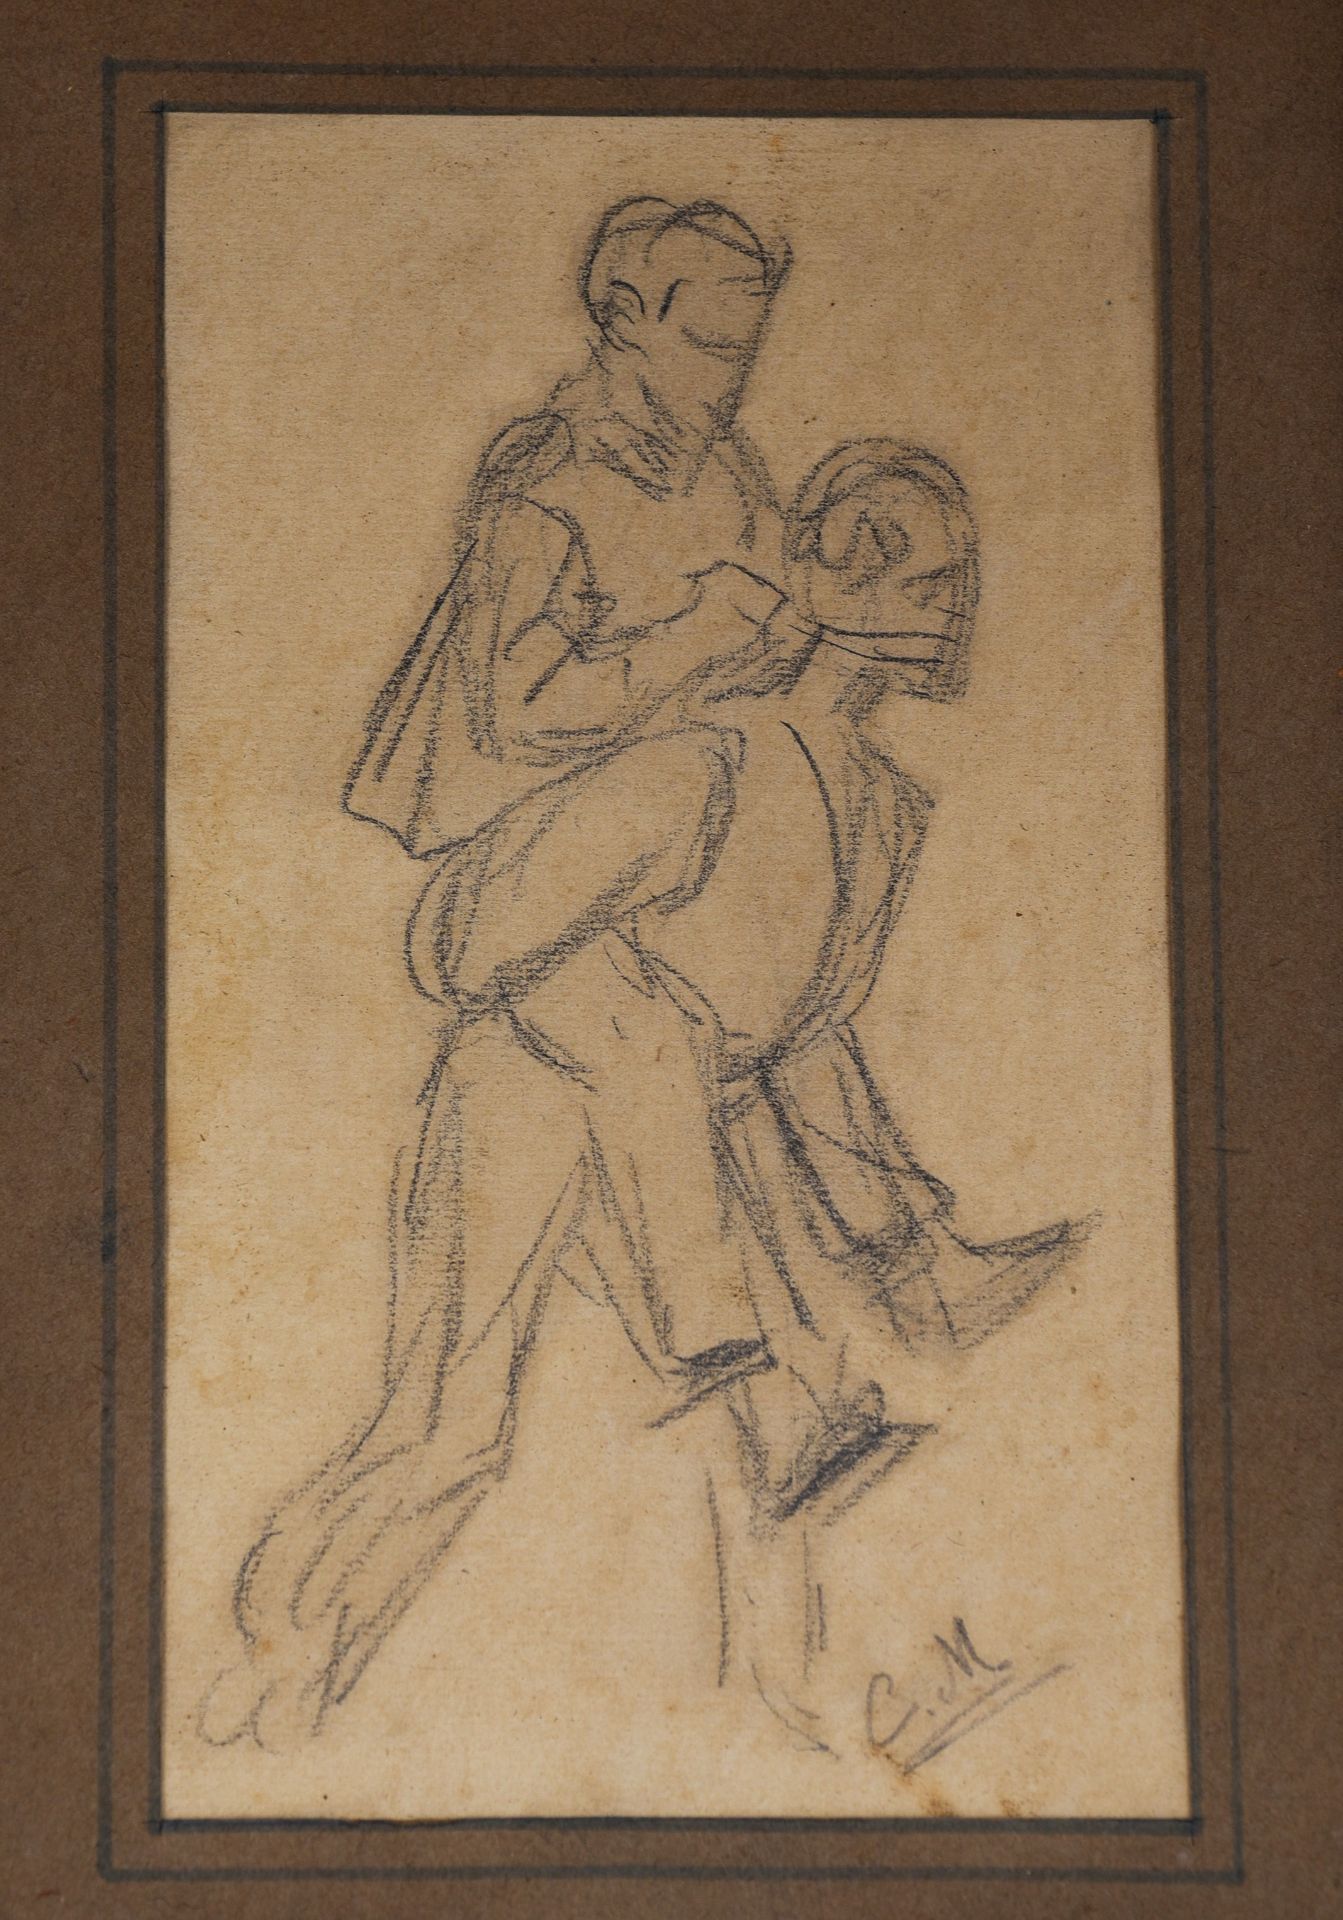 (T) Constantin Meunier (1831-1905), study drawing, charcoal on paper, 11 x 19 cm - Image 10 of 12